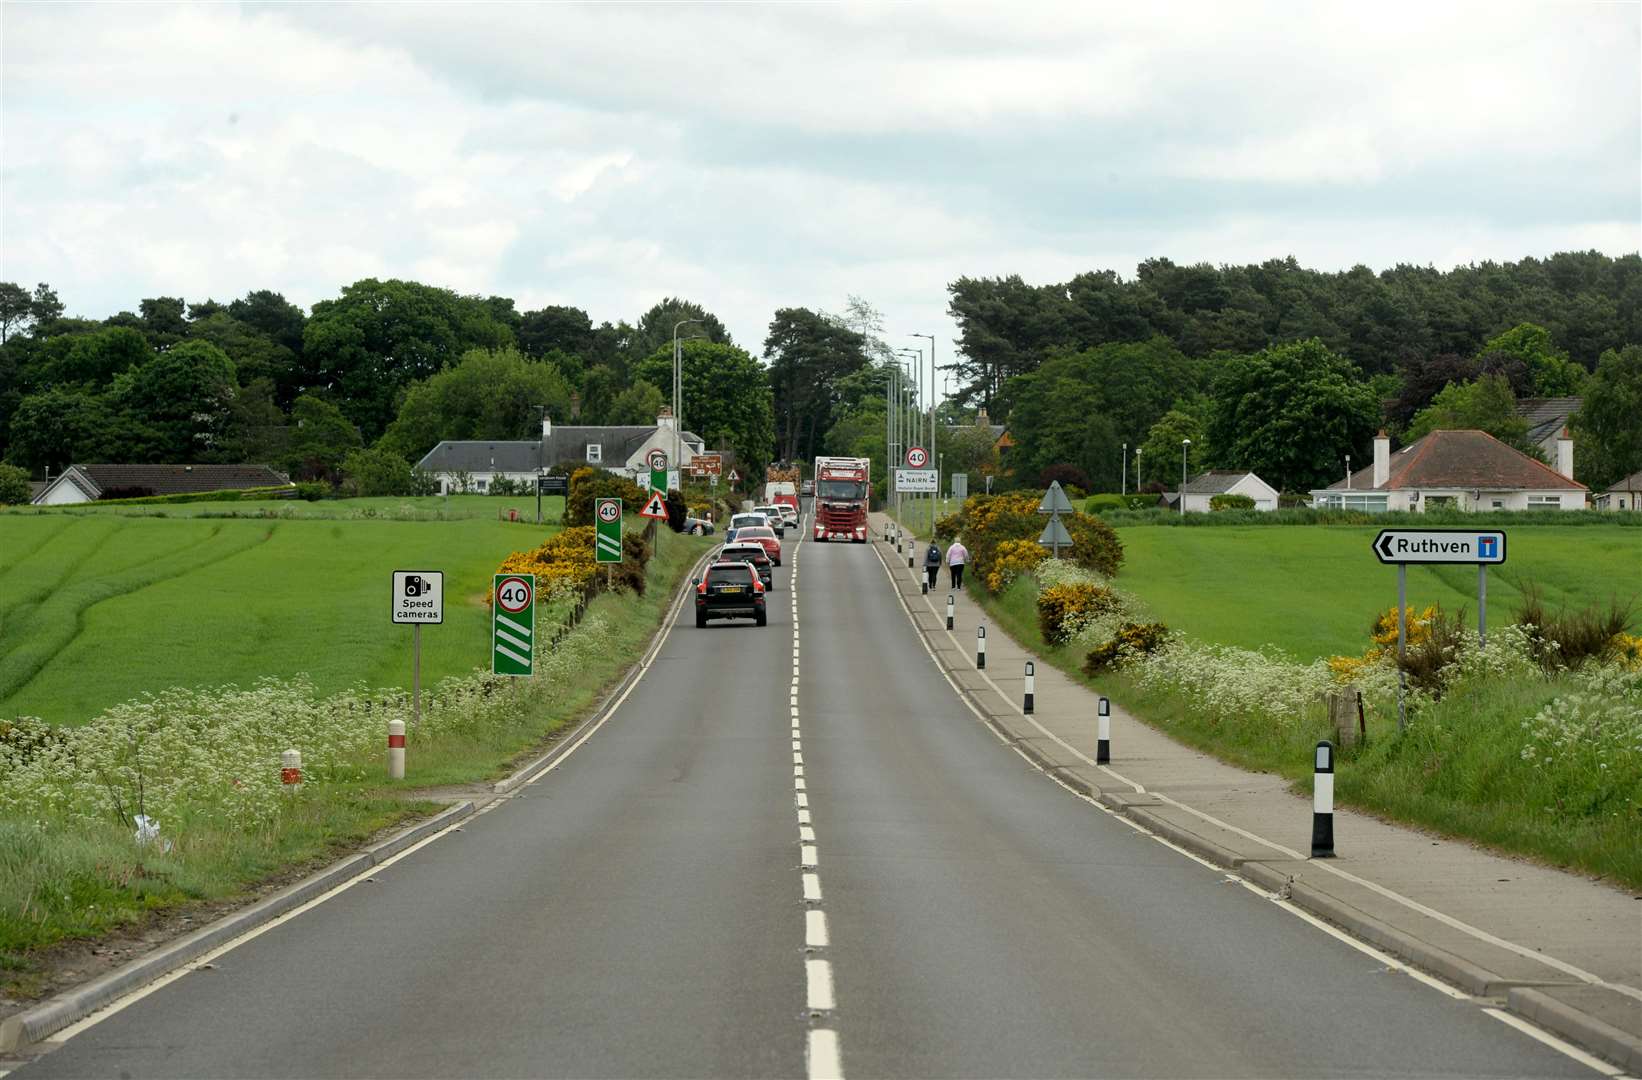 Sandown lands lie either side of the A96 as you enter Nairn from the west.